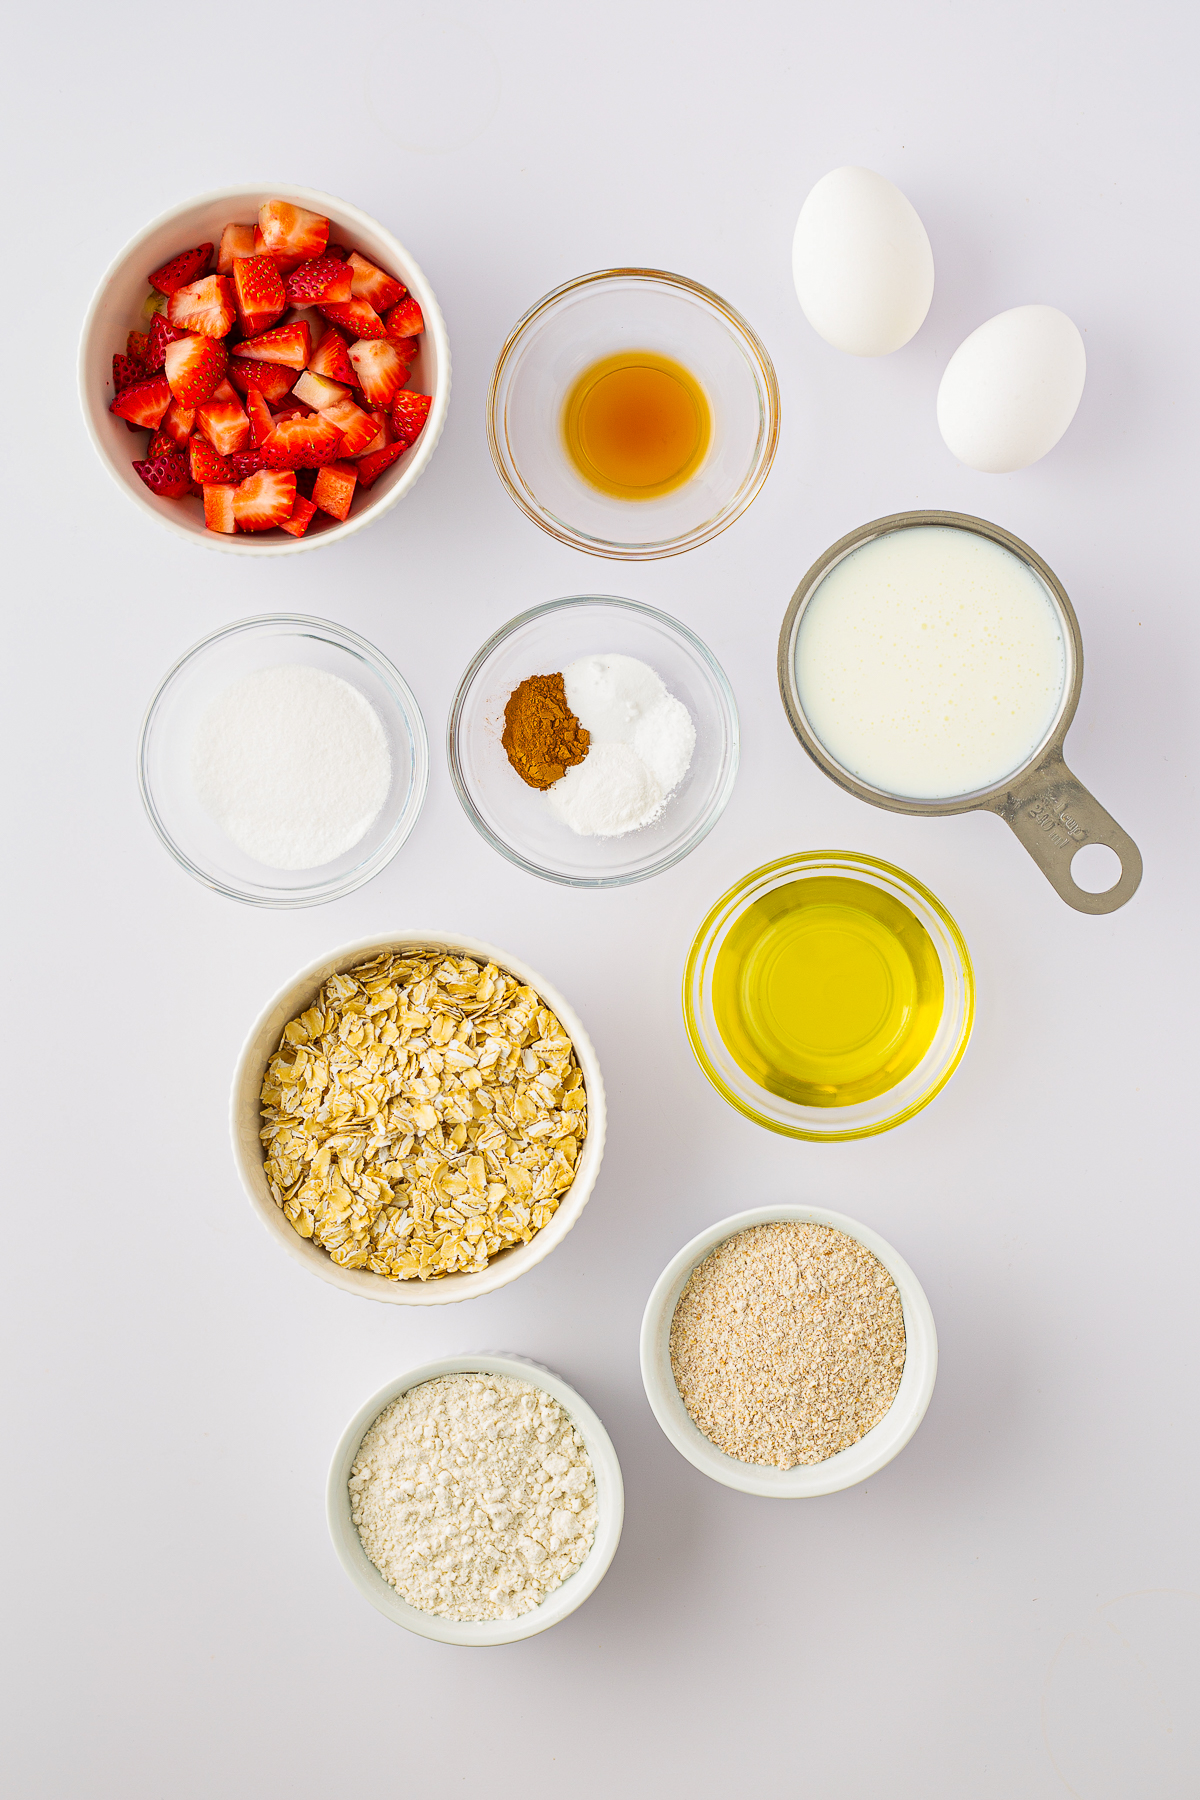 Ingredients needed to make Strawberry Oatmeal Pancakes.